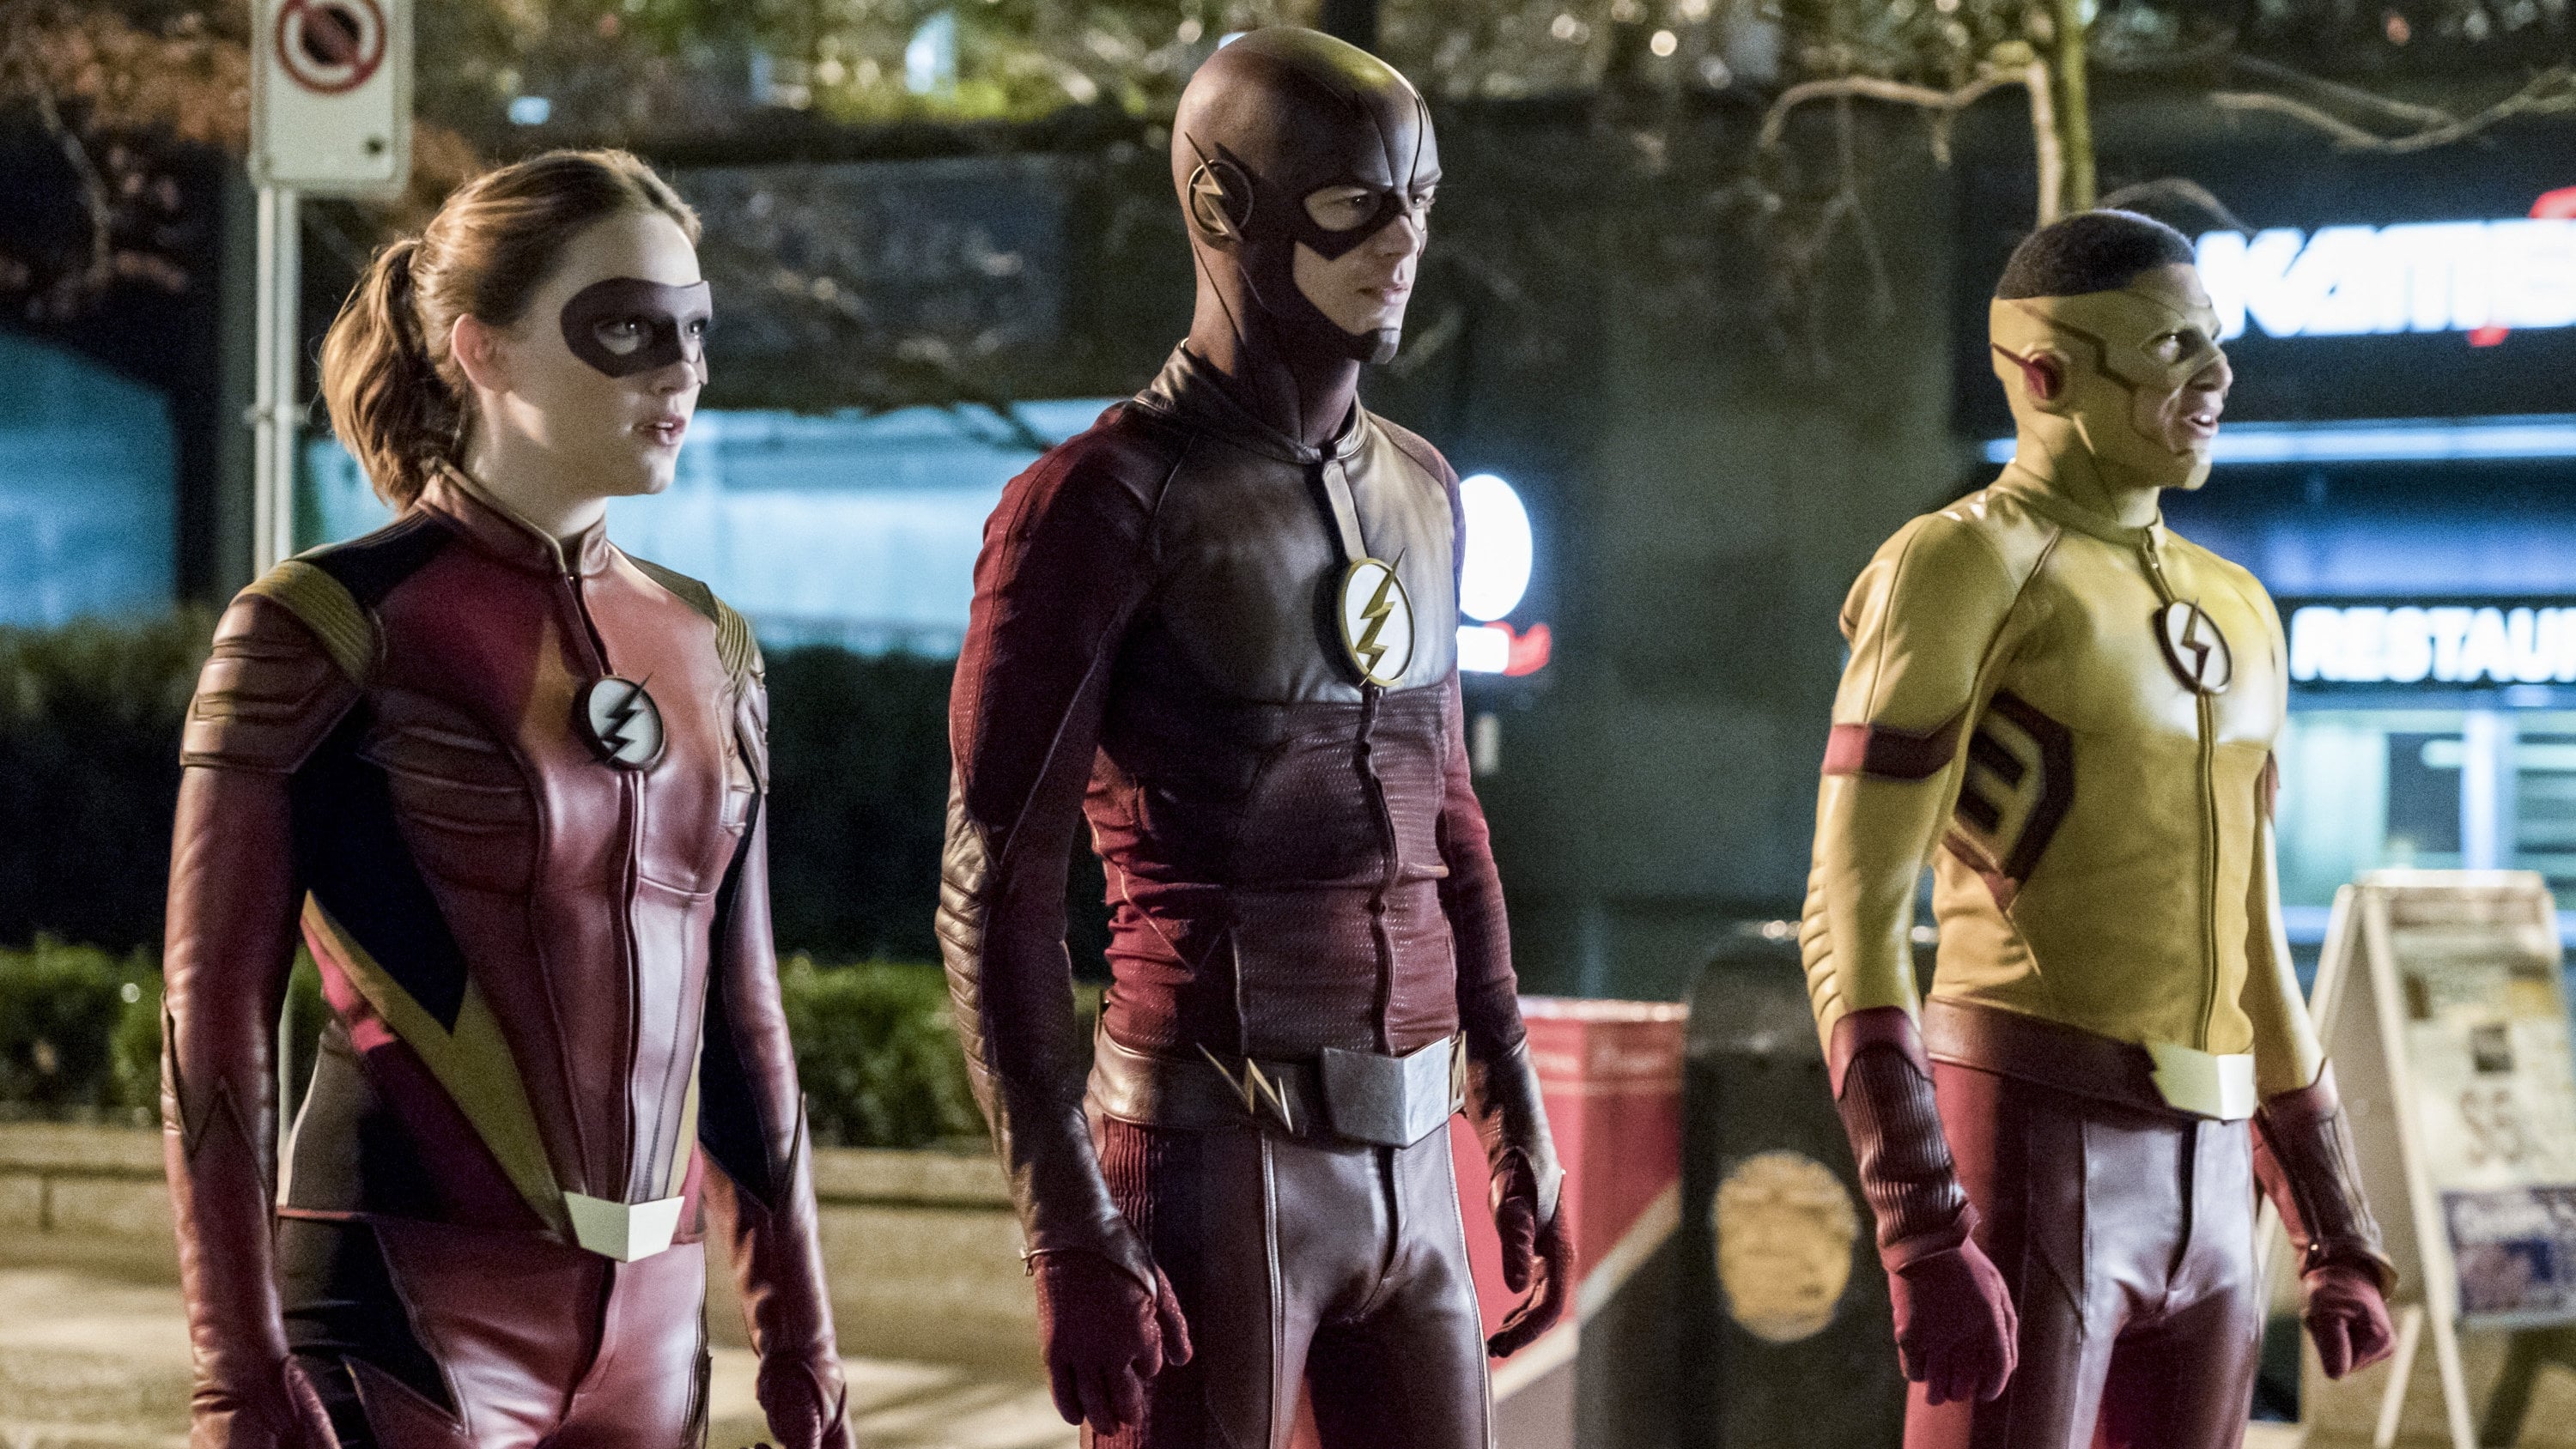 The Flash - Season 3 Episode 14 : Attack on Central City (2)